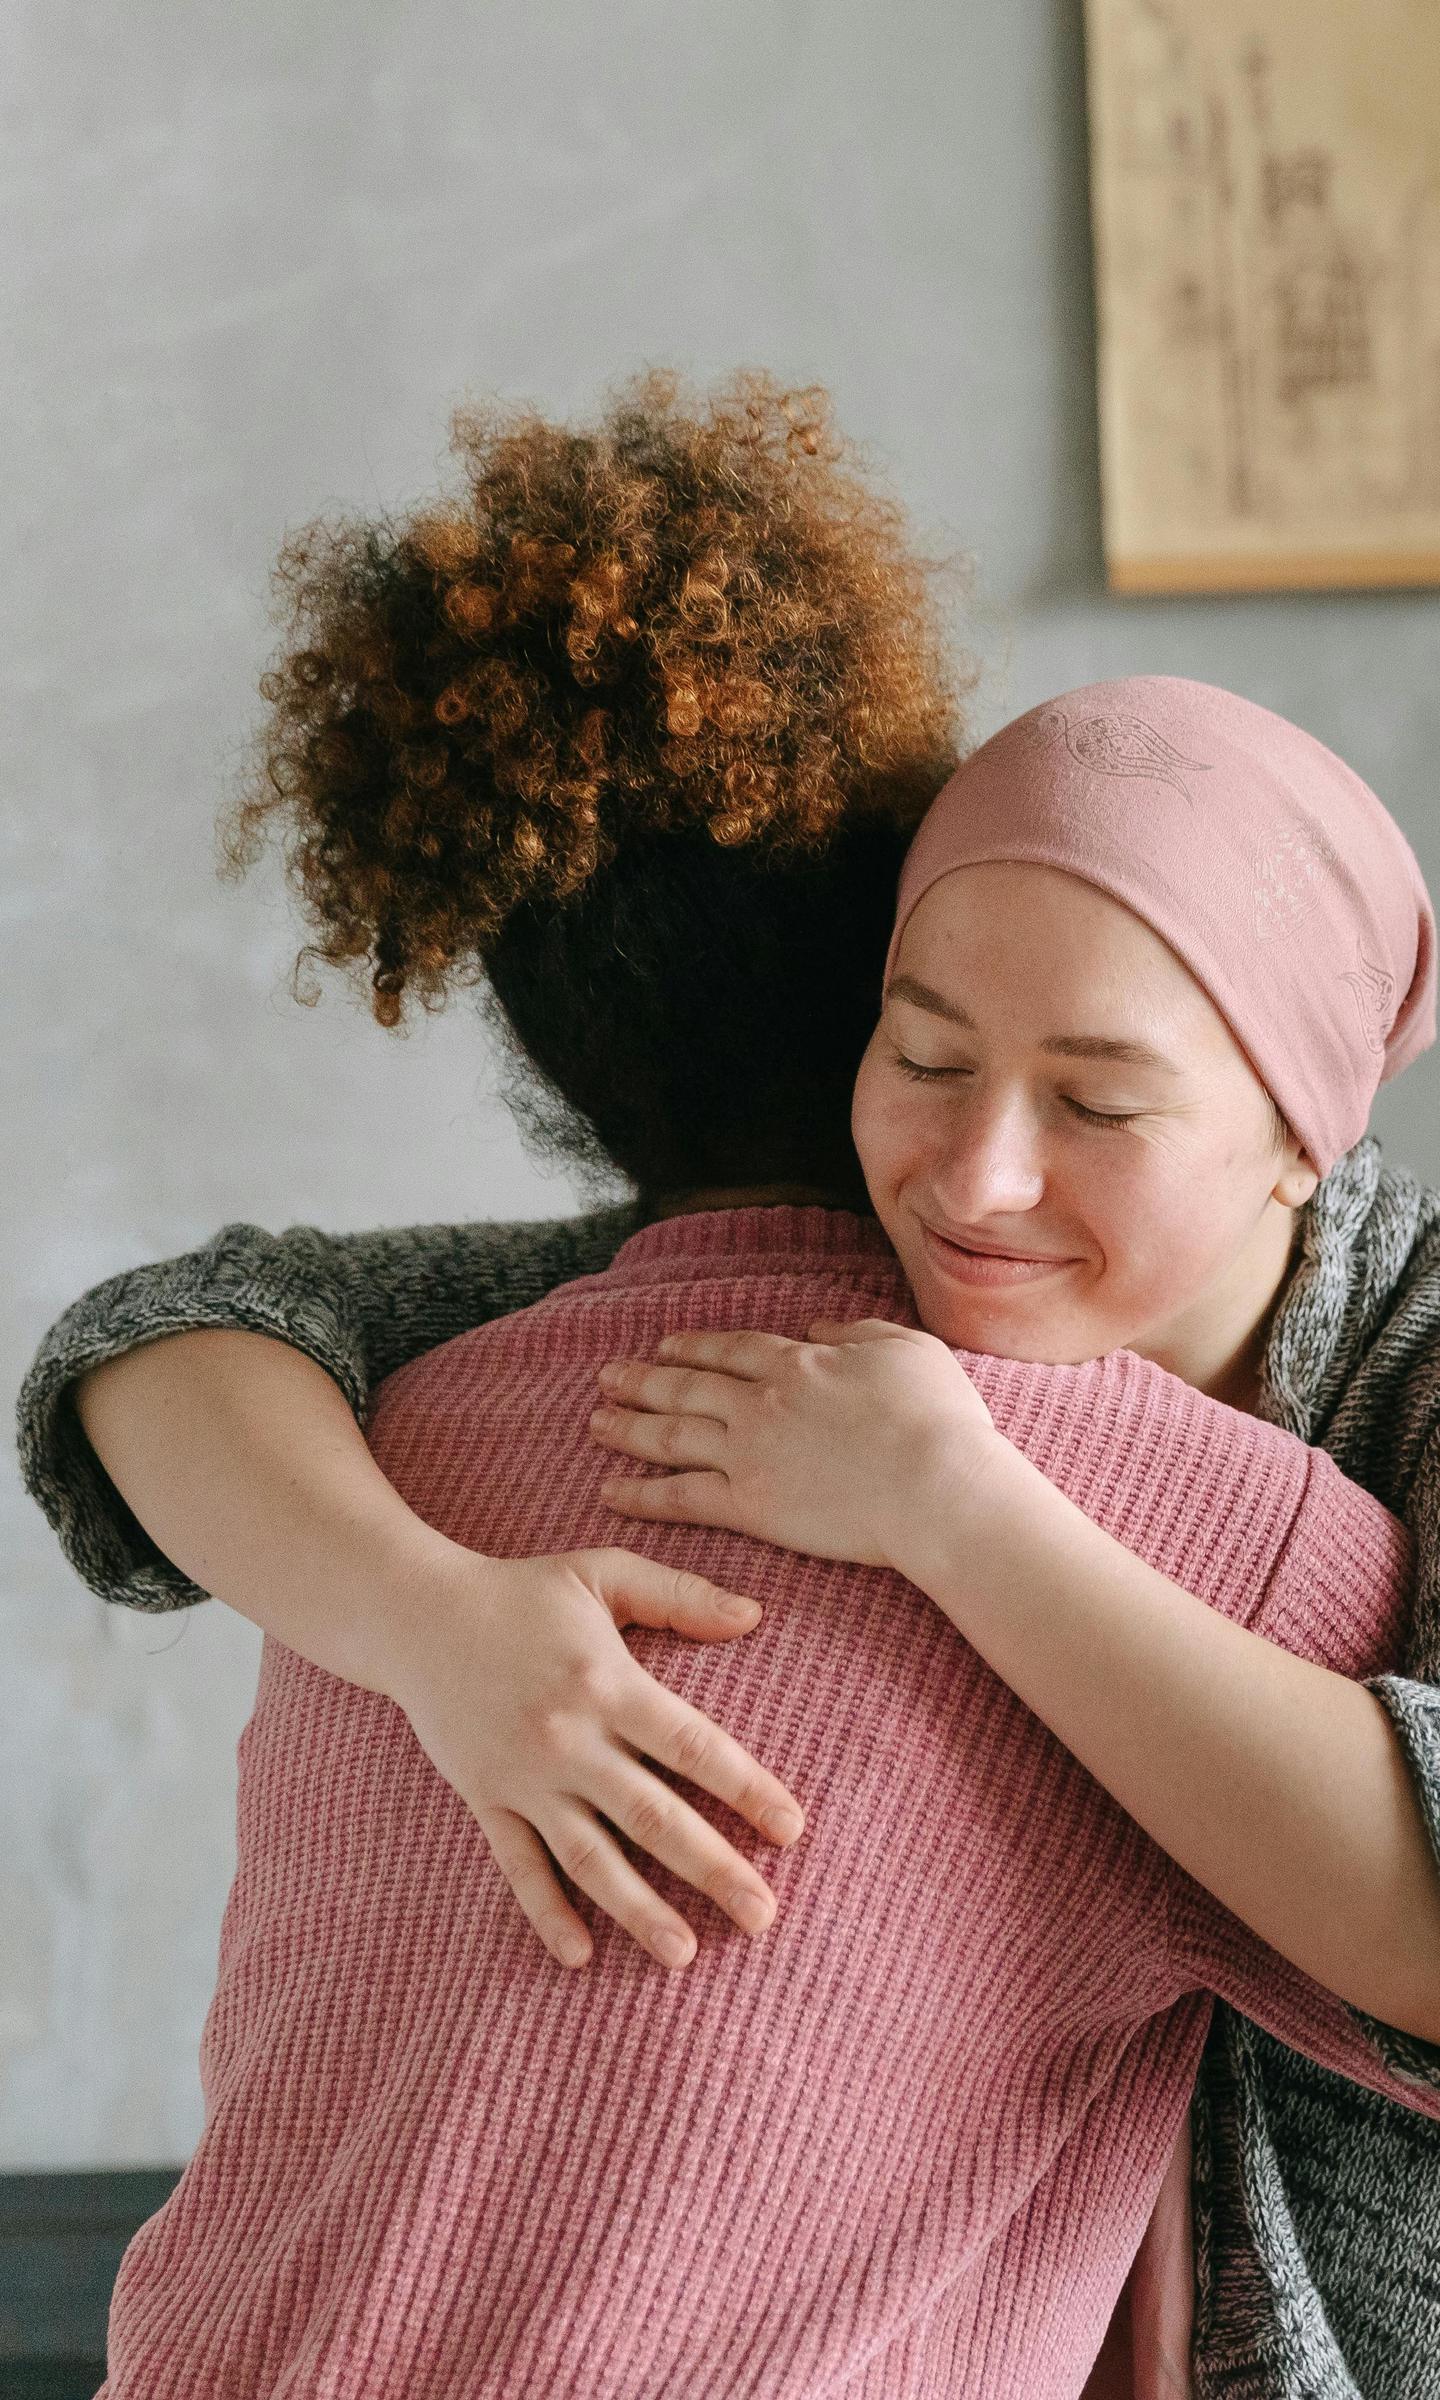 Friends embrace a woman, offering support and praise | Source: Pexels